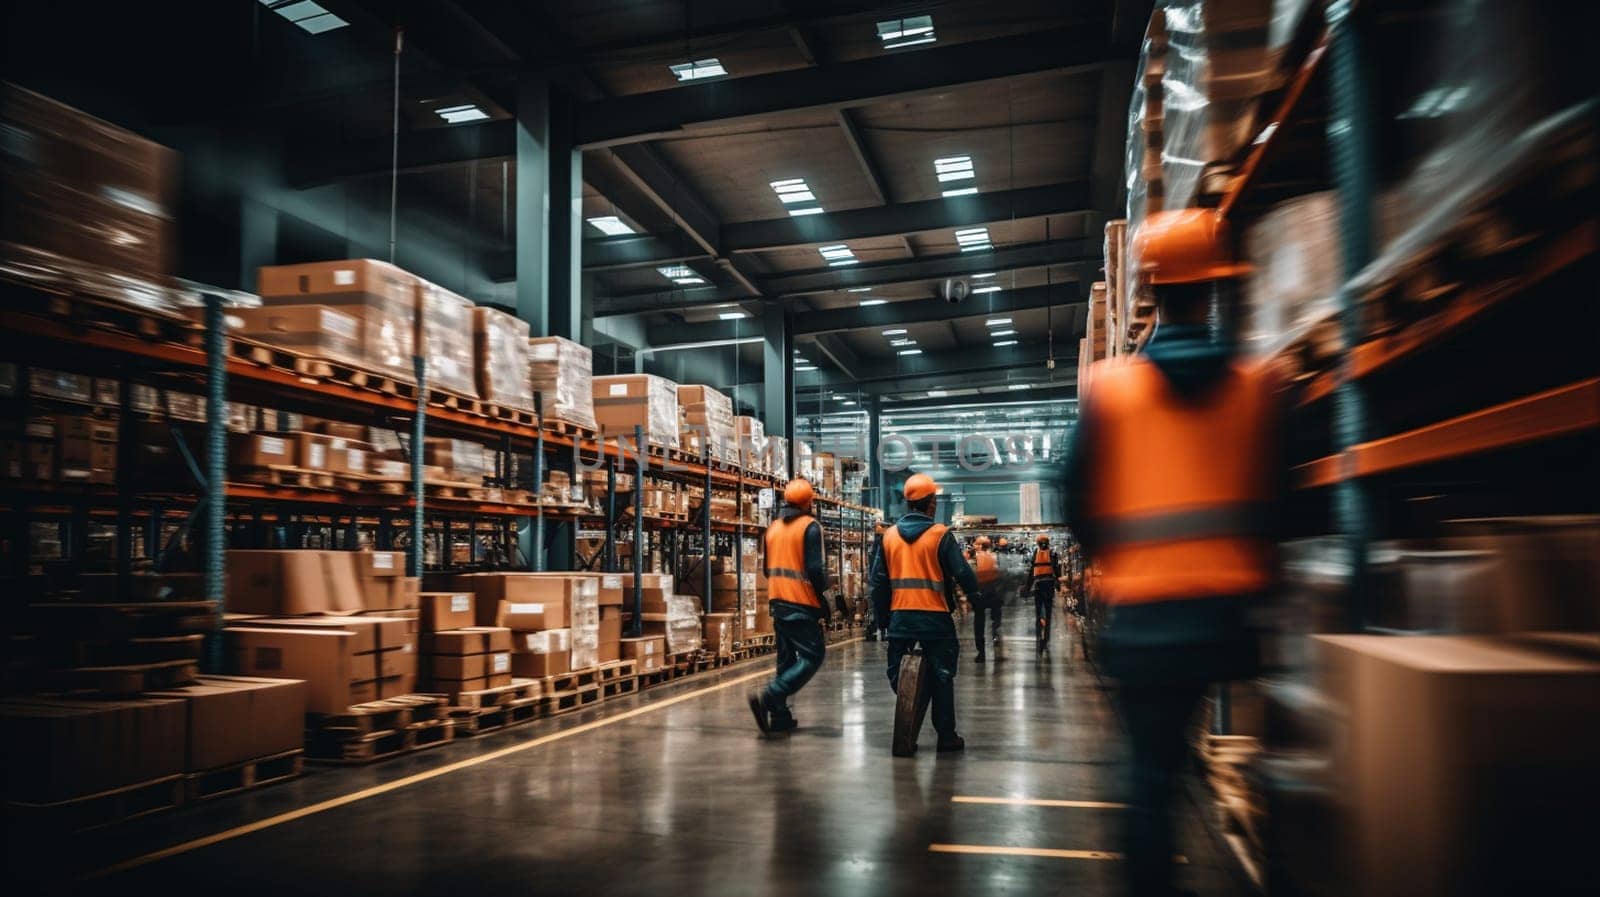 Logistics business warehouse, shipment and loading concept. workers in reflective vests blurred with movement. Staff in a warehouse move between storage racks, motion blur background transport. High quality photo